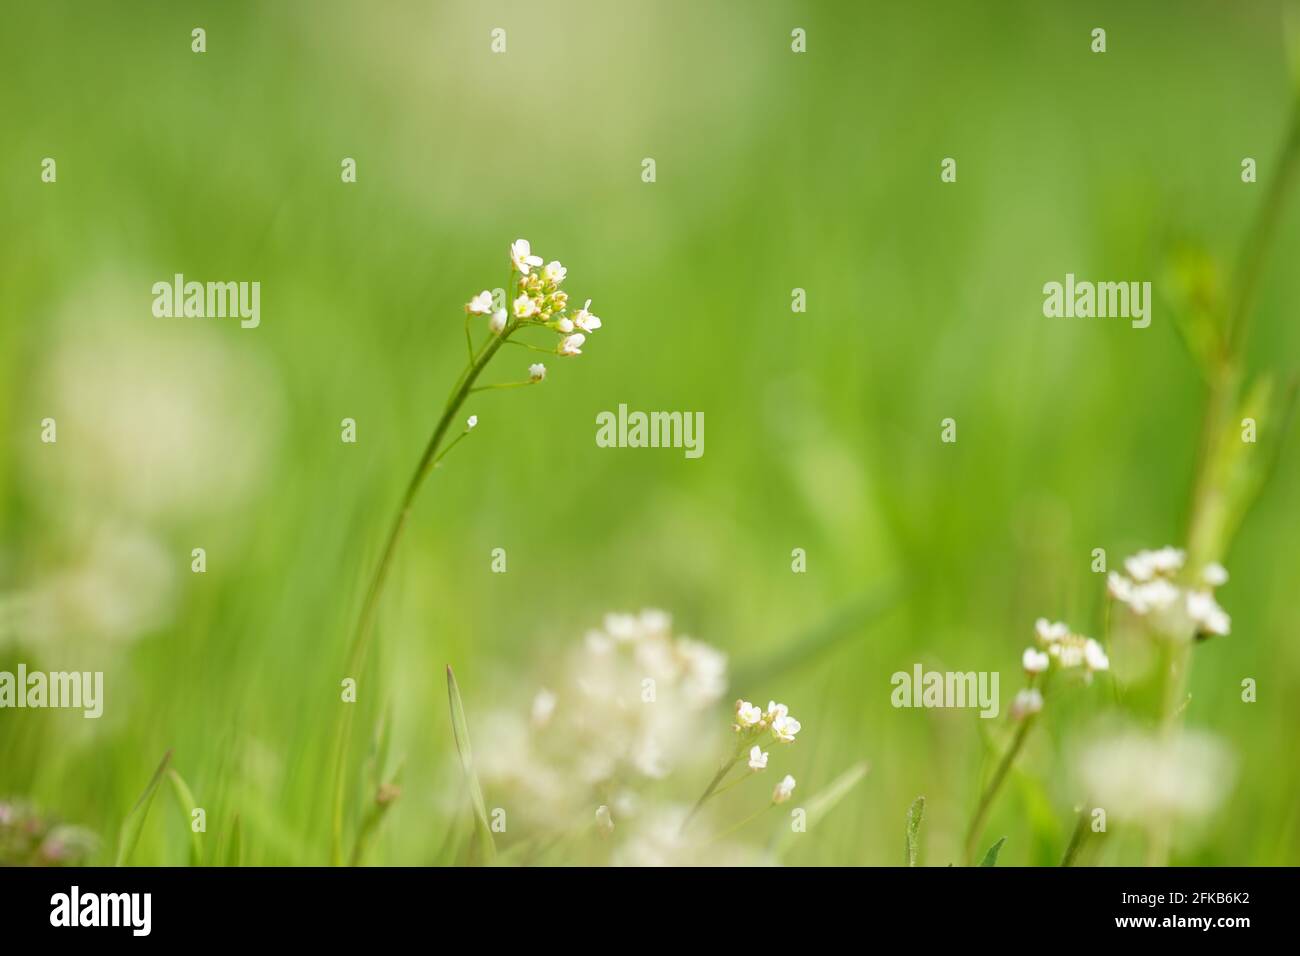 Lovely small white flowers grow in spring green grass. Stock Photo